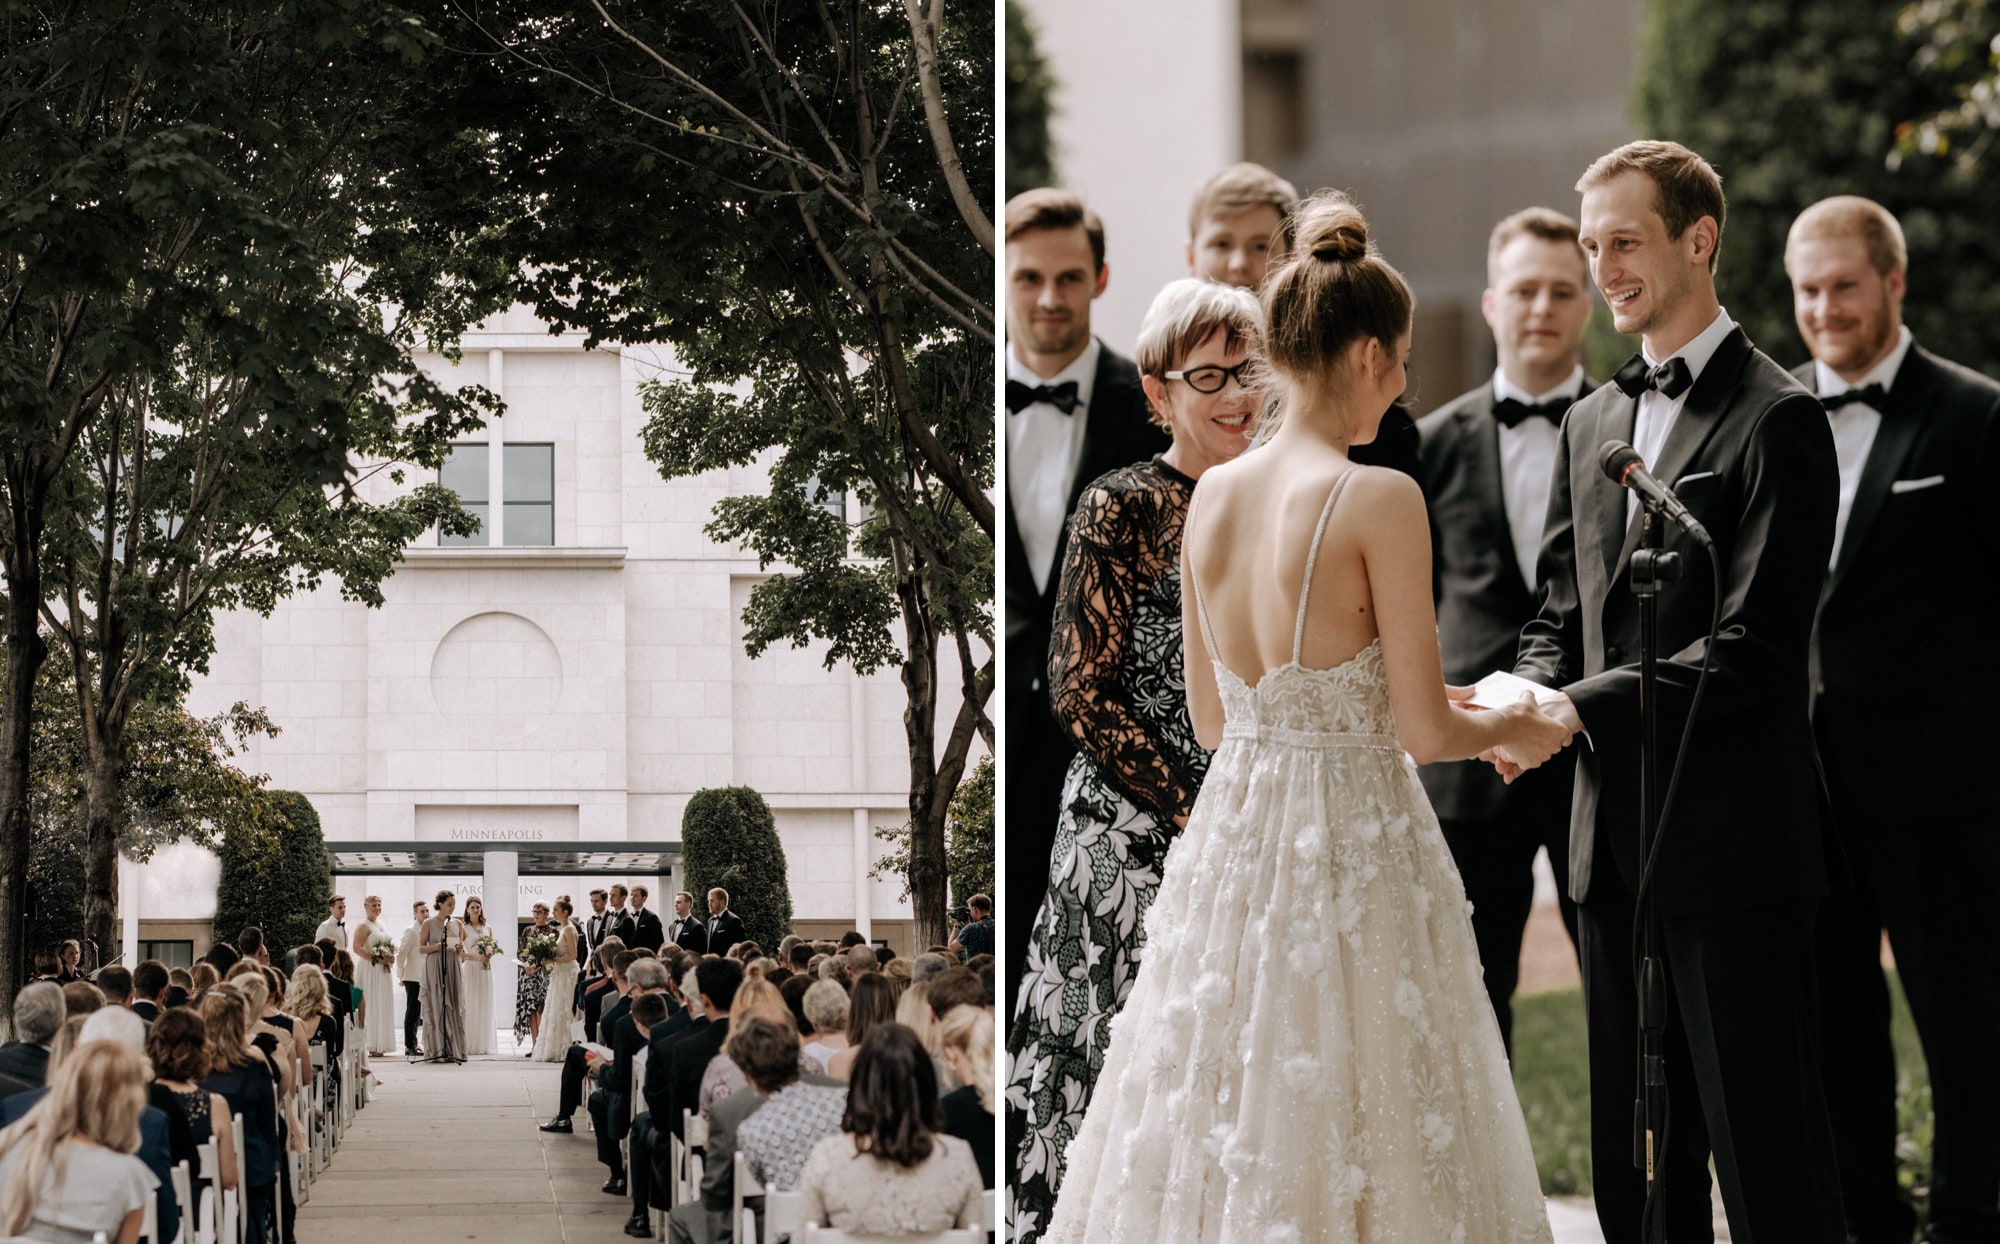 Seated guests watch as a happy bride and groom exchange vows during a beautiful outdoor wedding ceremony at the Minneapolis Institute of Art, captured by Minneapolis wedding photographer Josh Olson.